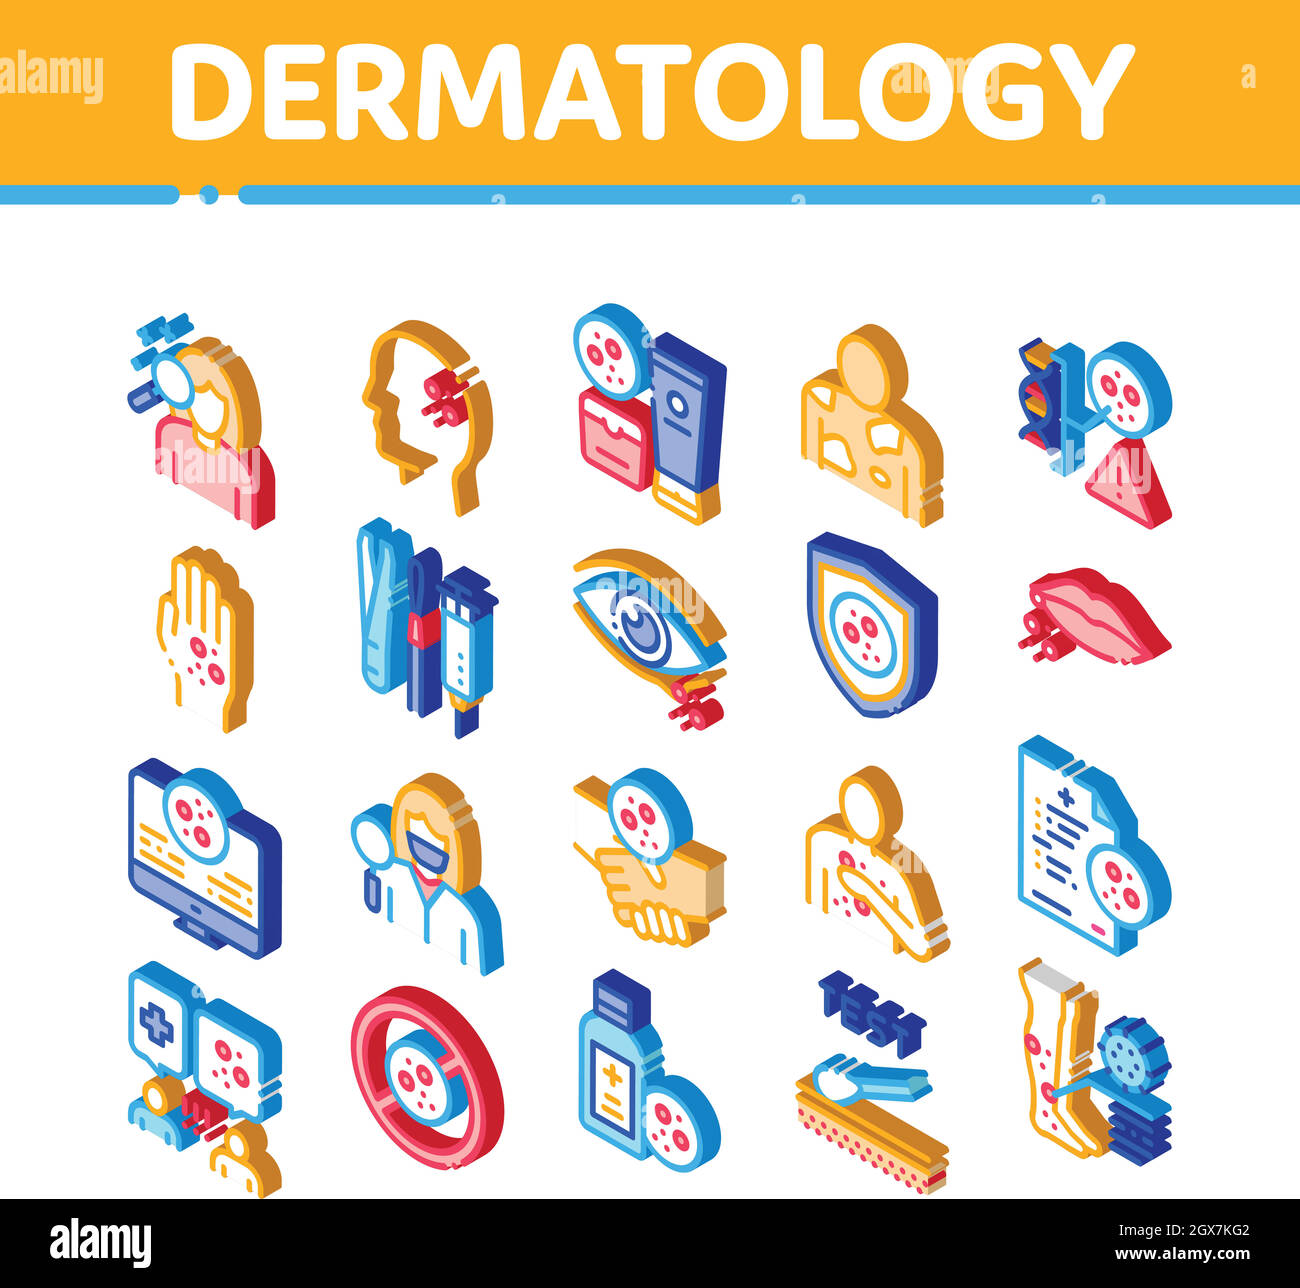 Dermatology Skin Care Isometric Icons Set Vector Stock Vector